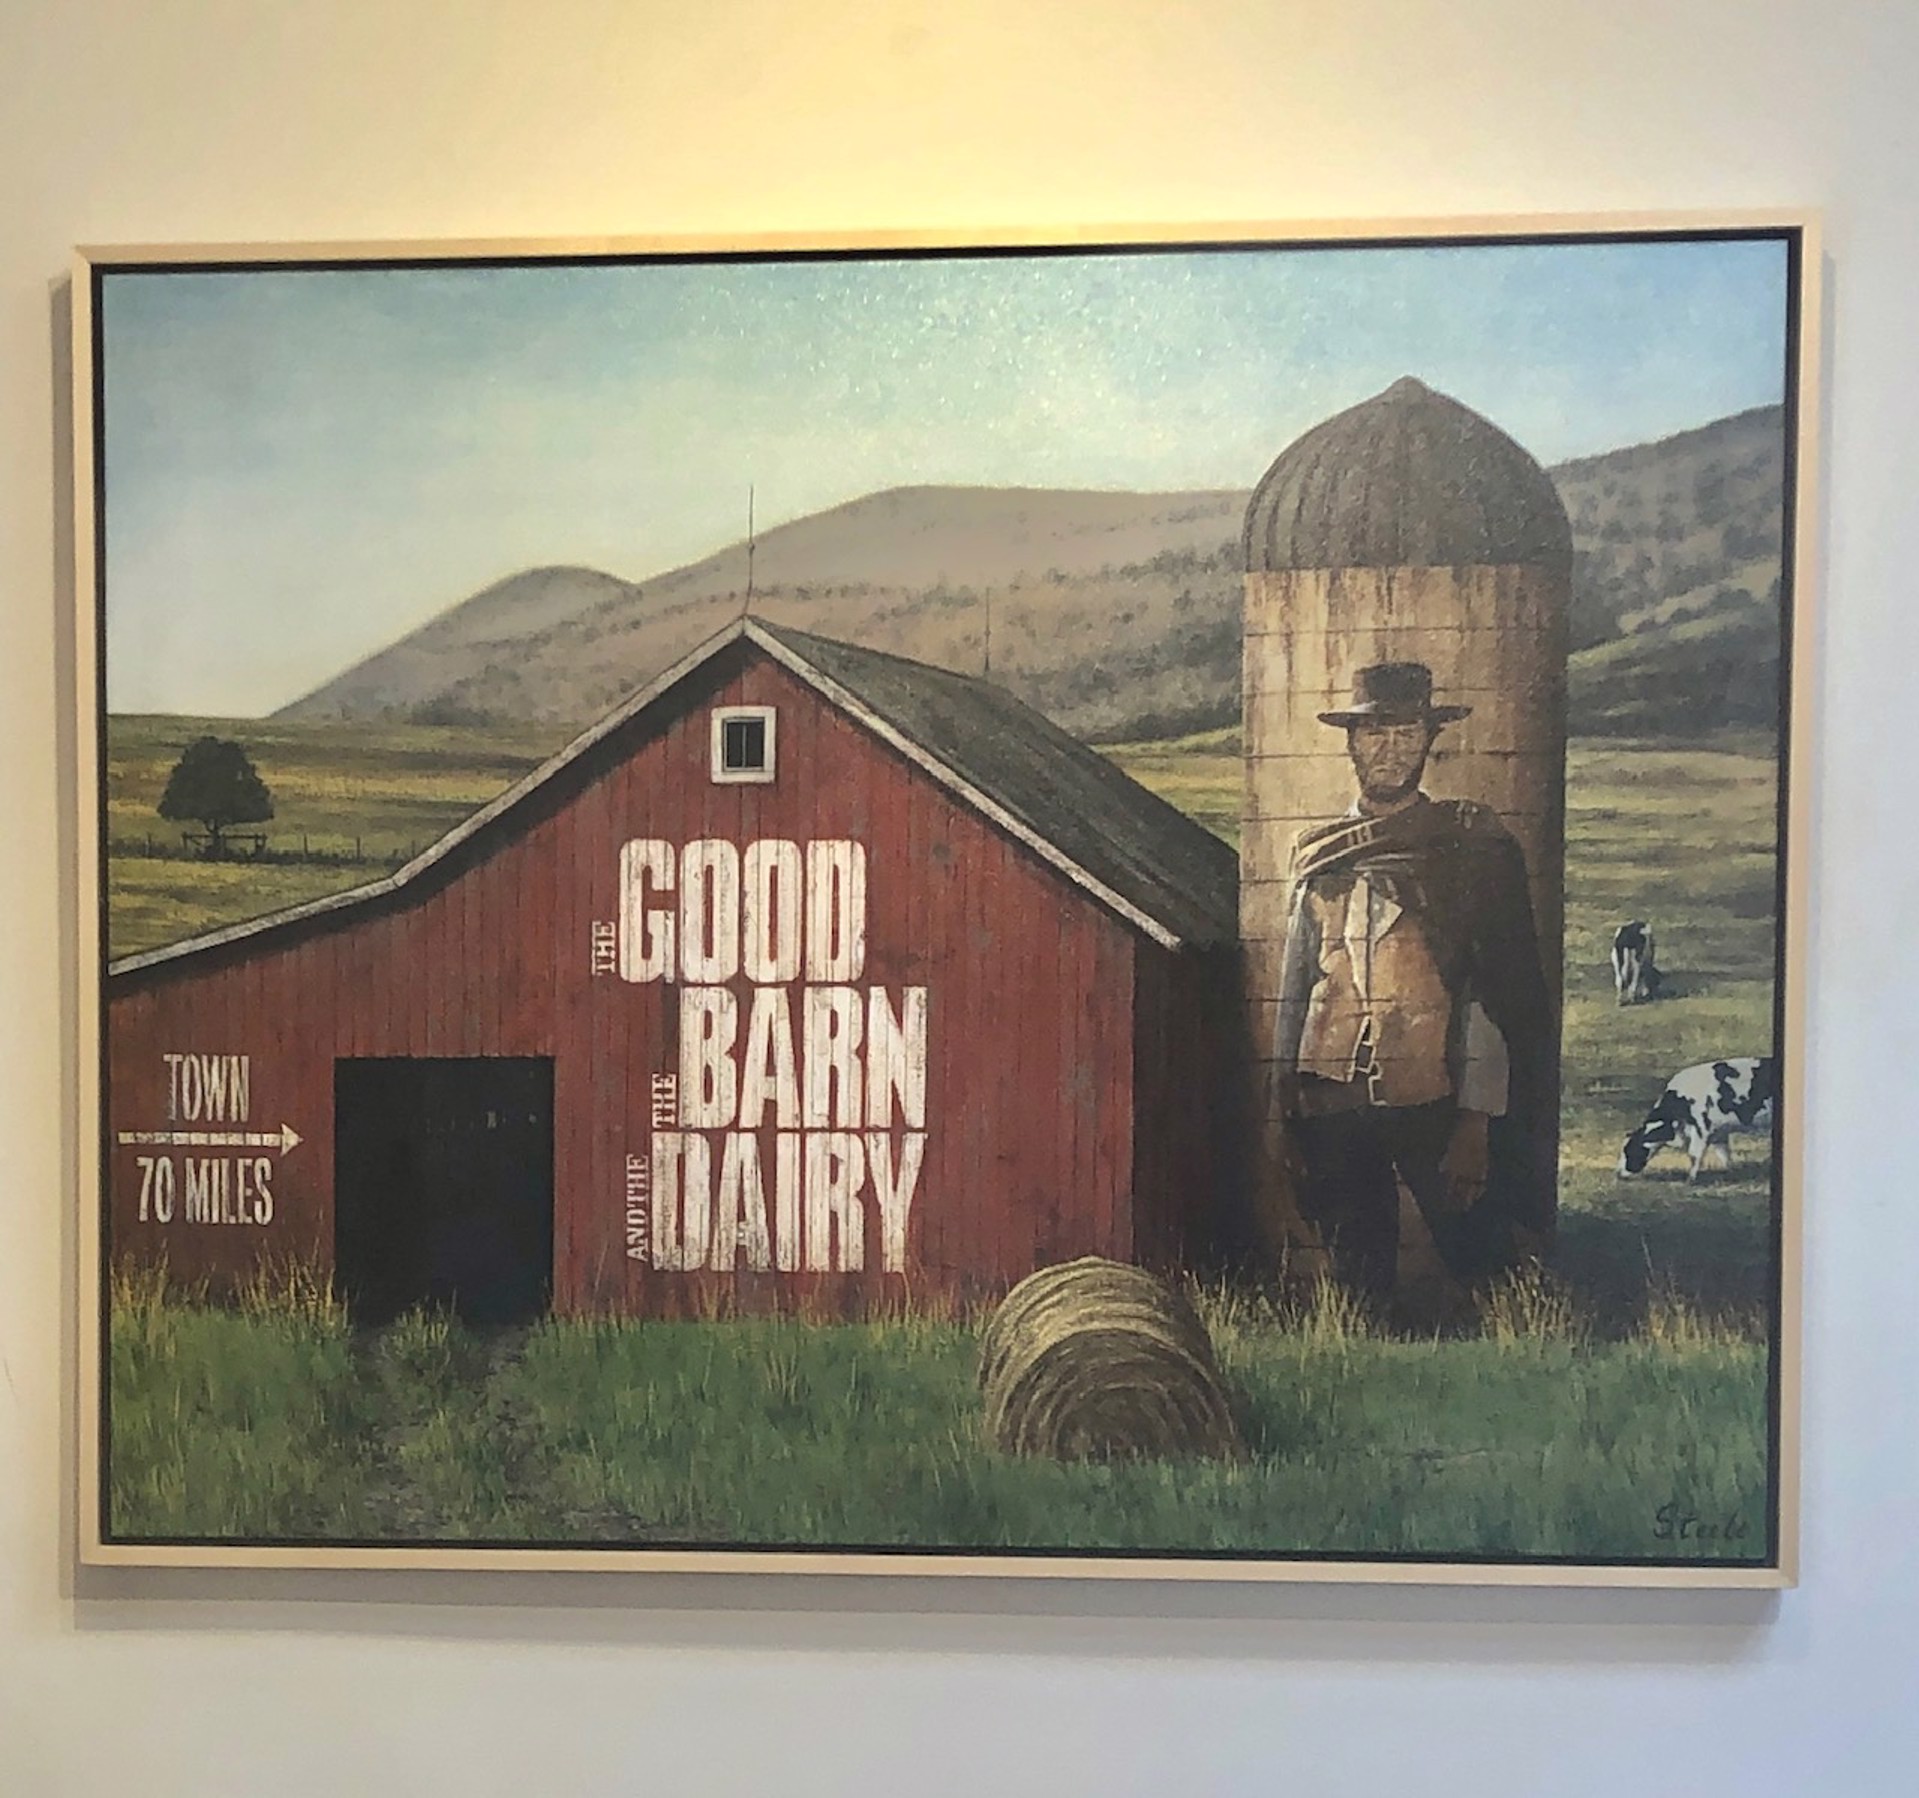 The Good, the Barn and the Dairy by Ben Steele